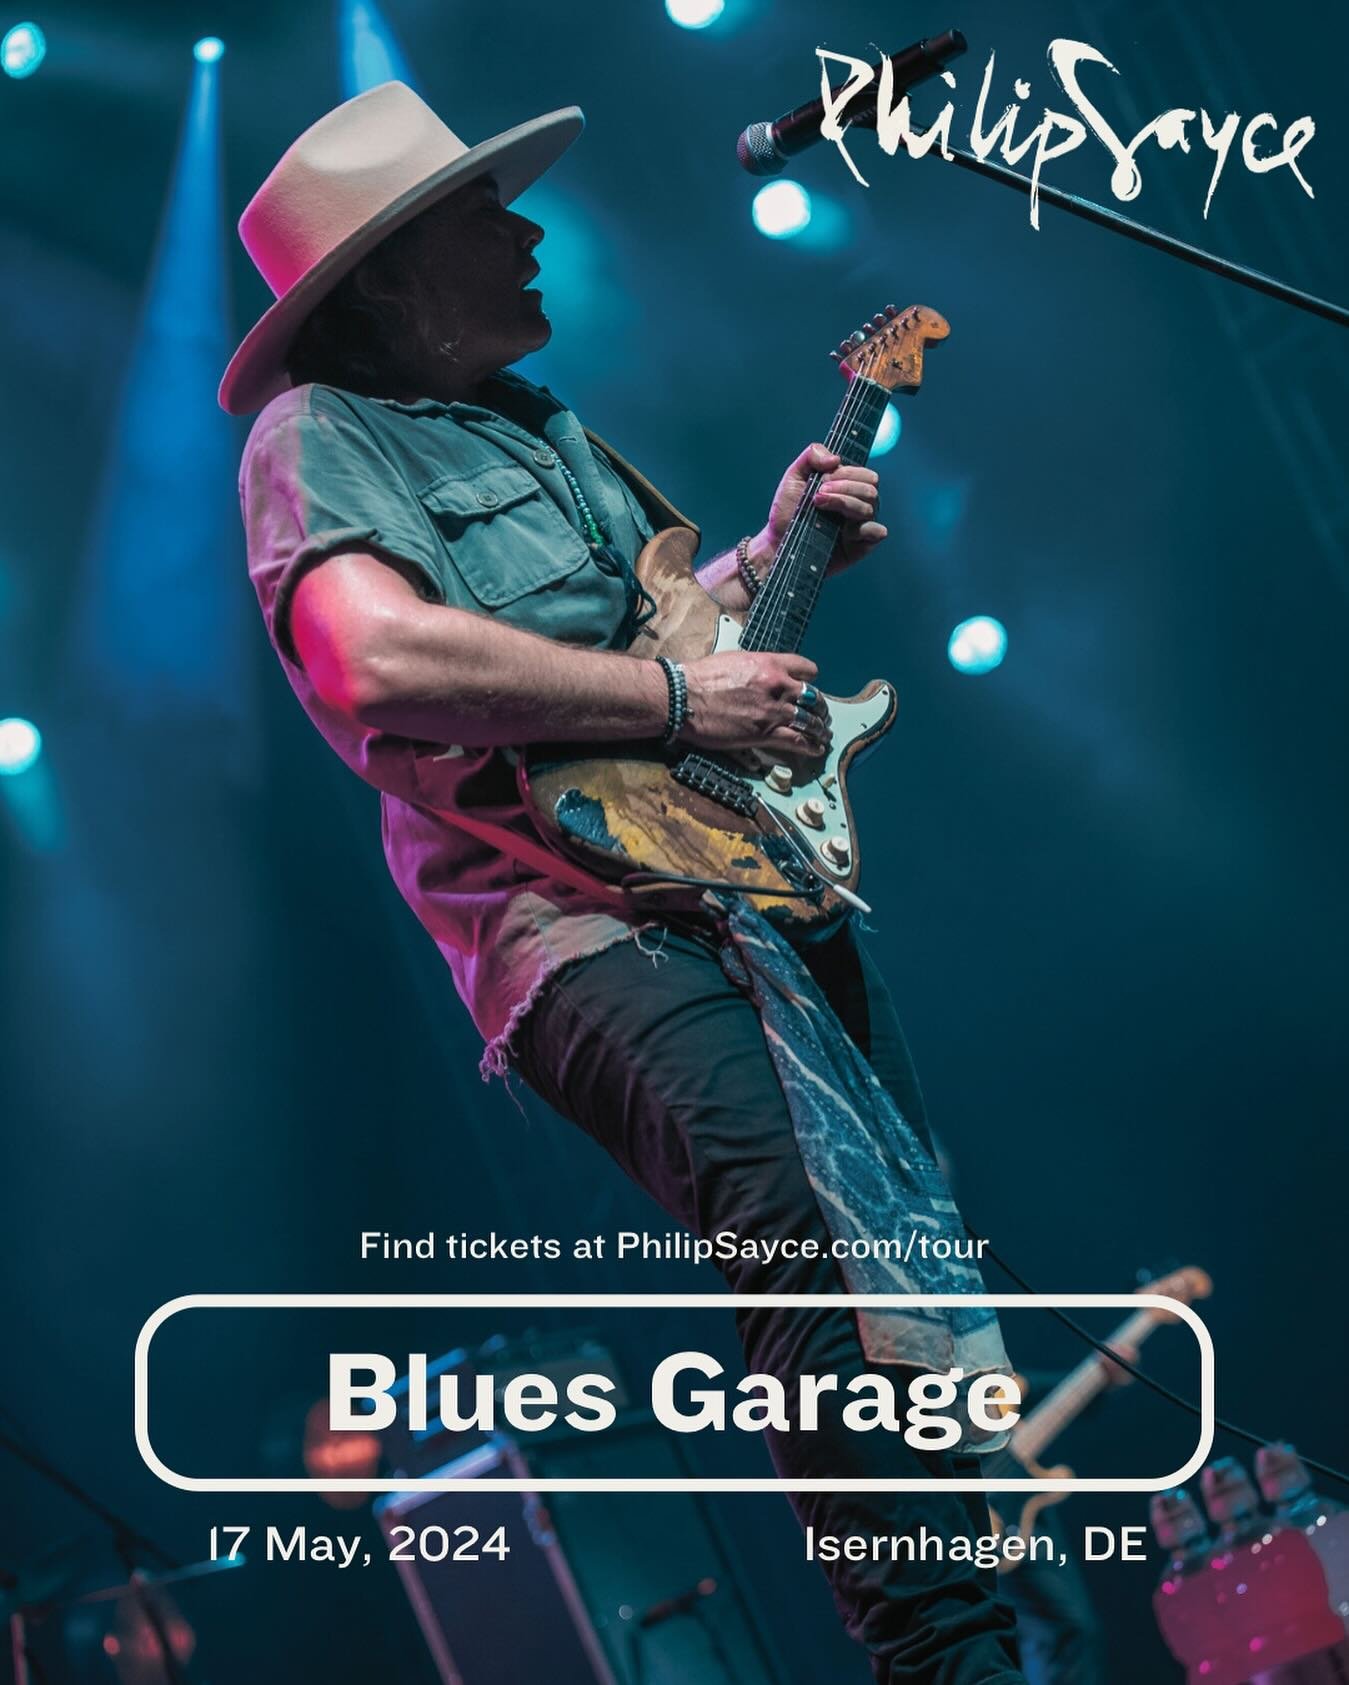 Germany, I&rsquo;ll be playing at Blues Garage in Isernhagen next month! Looking forward to seeing you there. You can find tickets to this show and many more at the link in my bio! Thank you for your support.🔥🎶🎸✌🏻